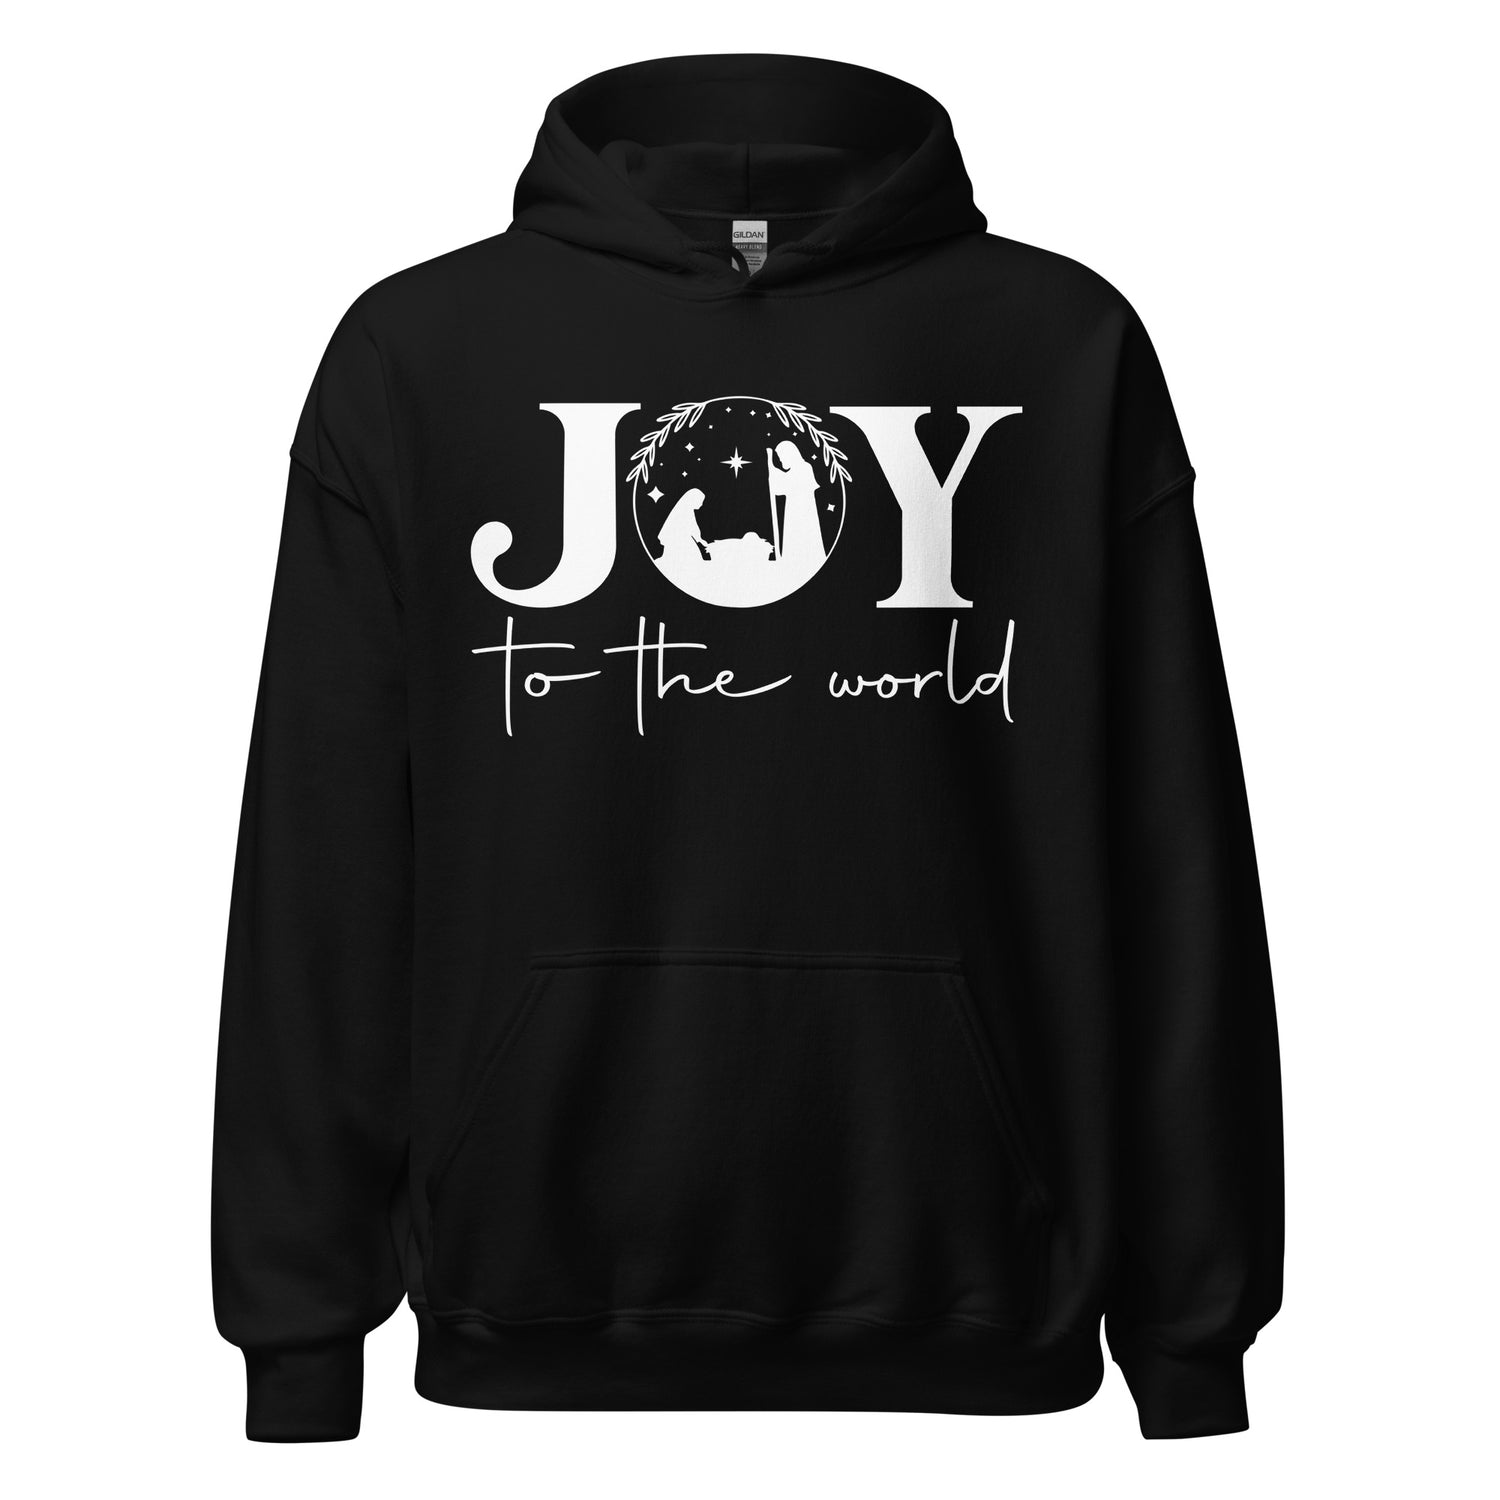 Joy to the world Hoodie Black hoodie with white design | MAD Apparel